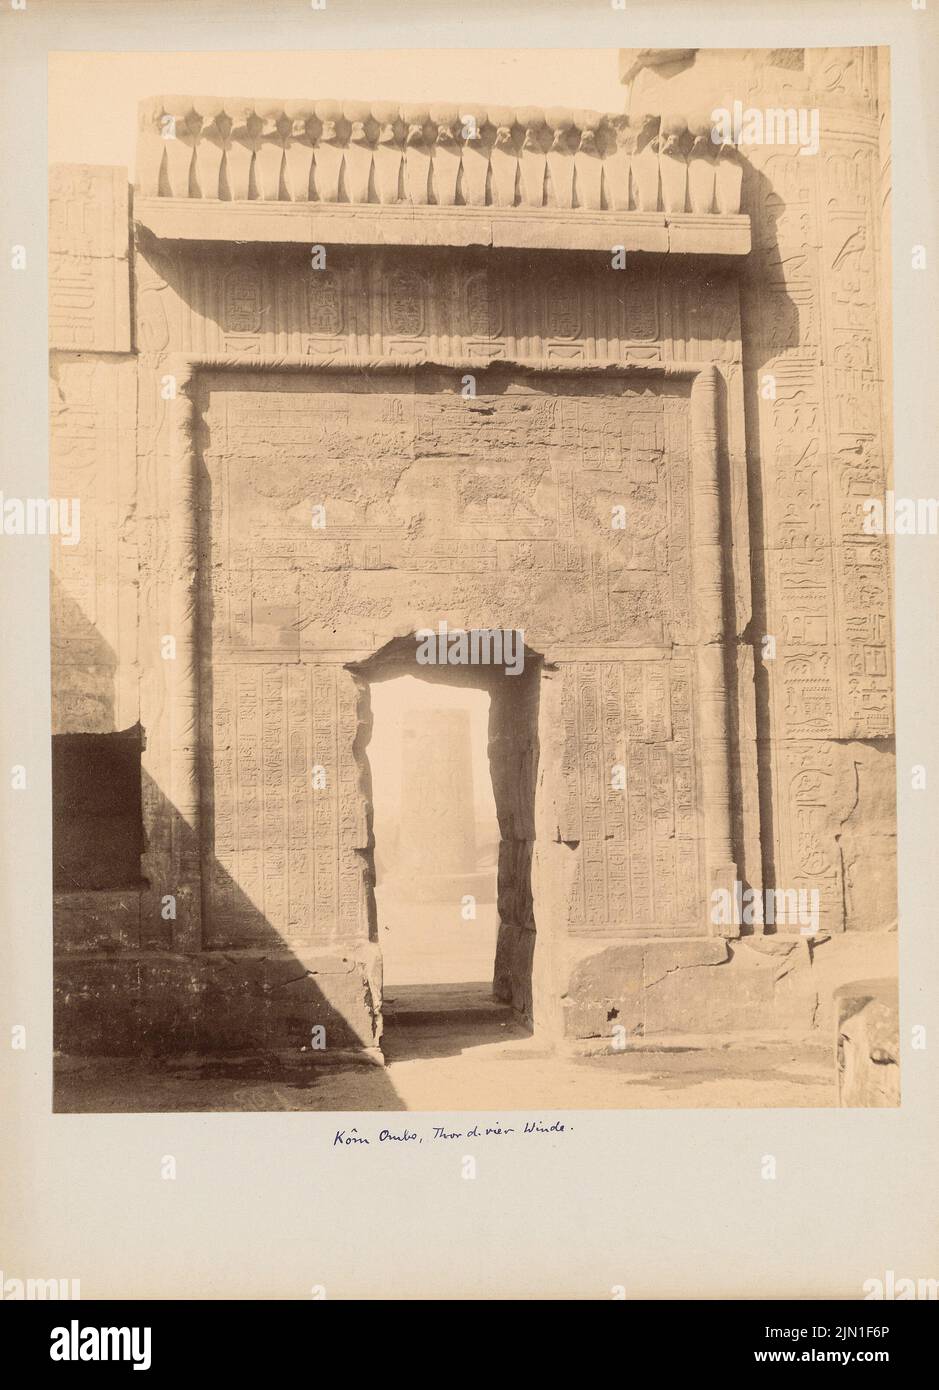 Unknown photographer, Kom Ombo Temple (without Dat.): Gate of the four winds. Photo on cardboard, 32.1 x 23.2 cm (including scan edges) unbek. Fotograf : Tempel von Kom Ombo Stock Photo